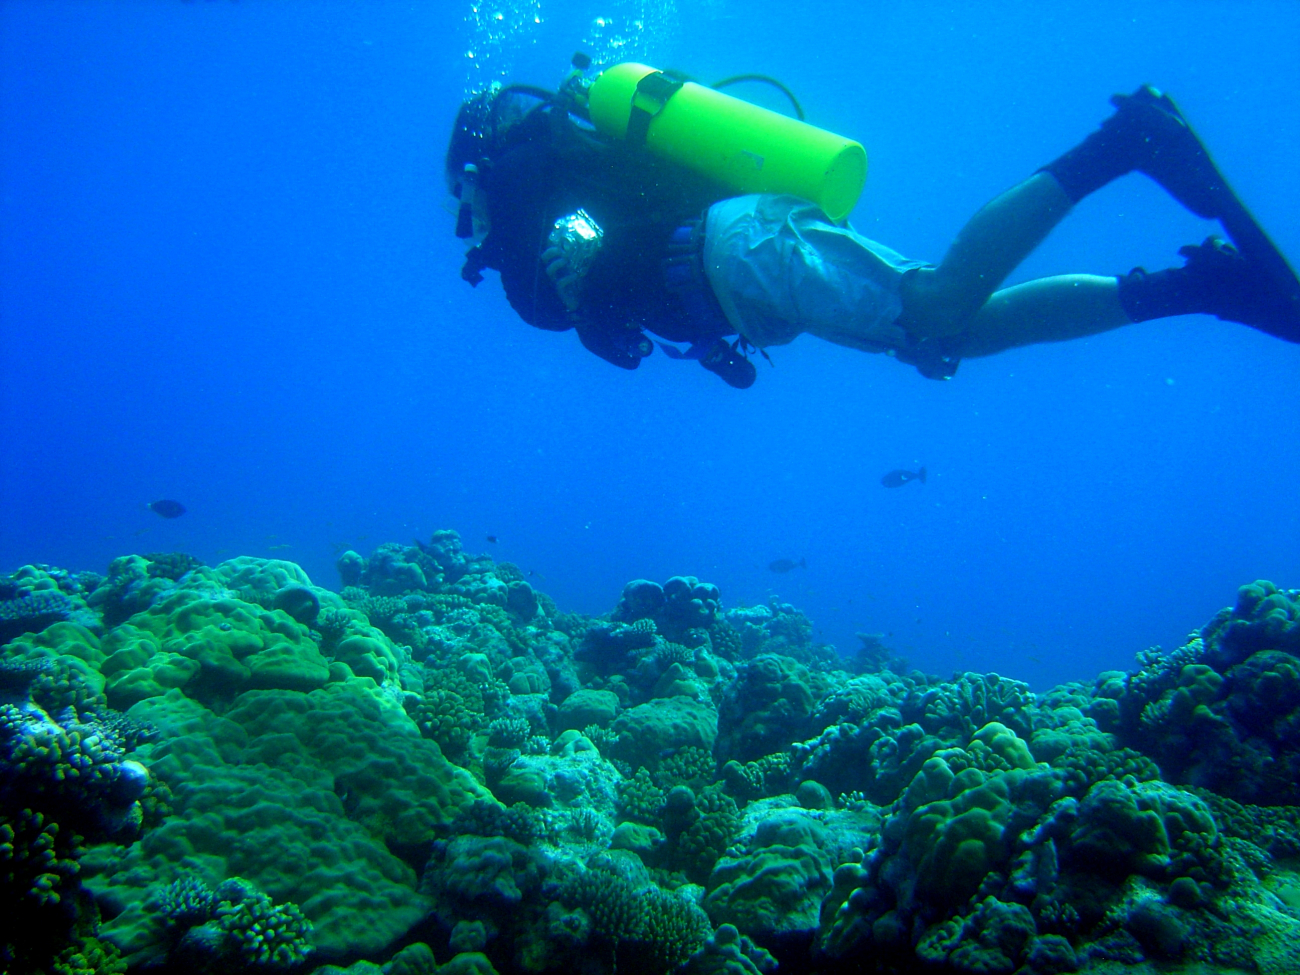 Diver swimming over the reef